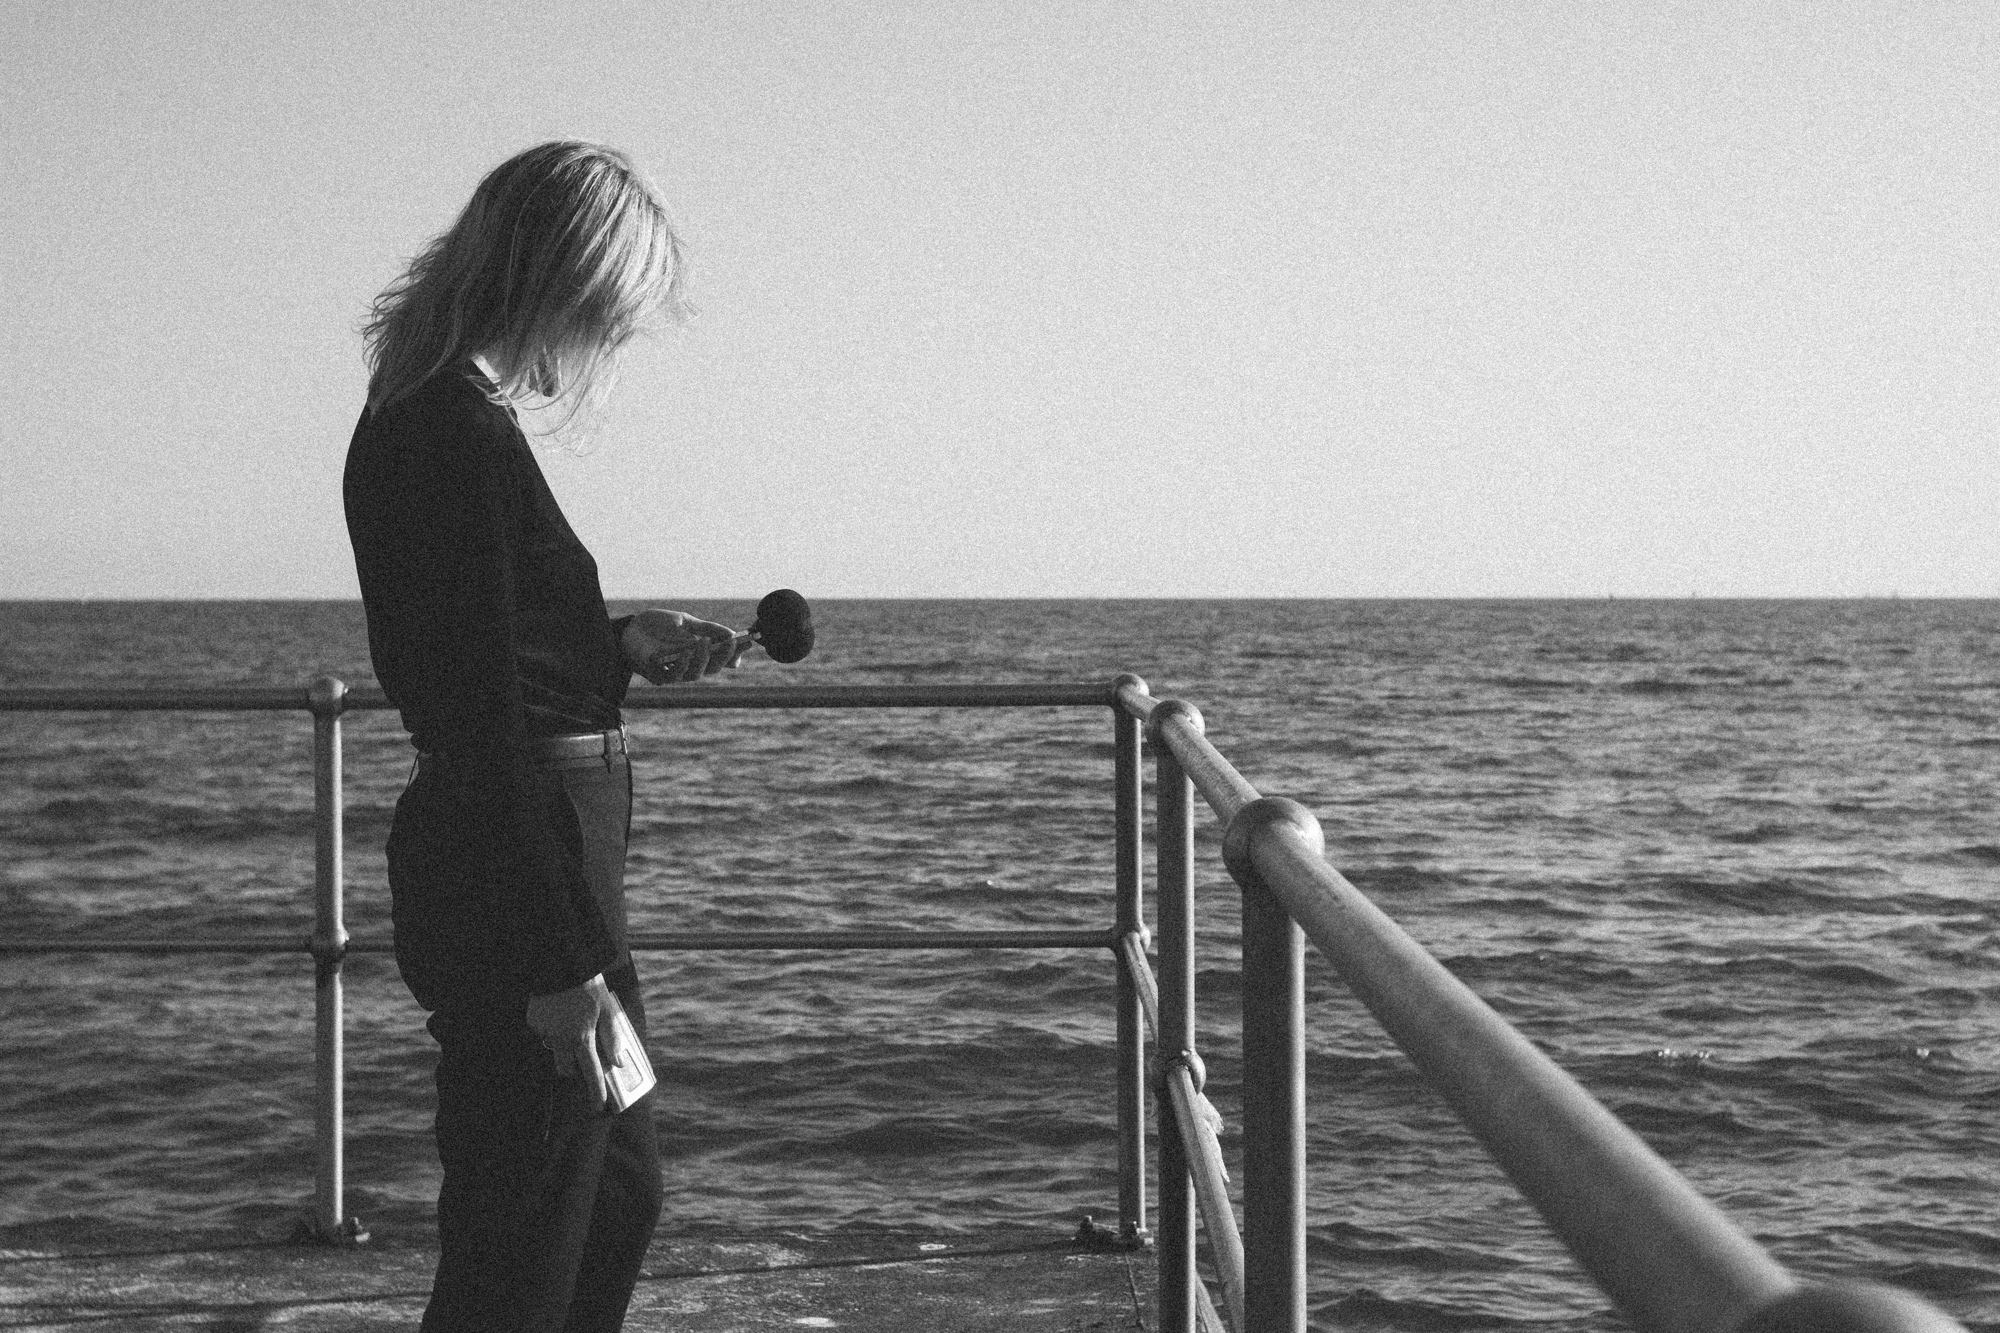 Black and White photo of a woman stands on a pier overlooking the sea. Promo for Ainslie Salon